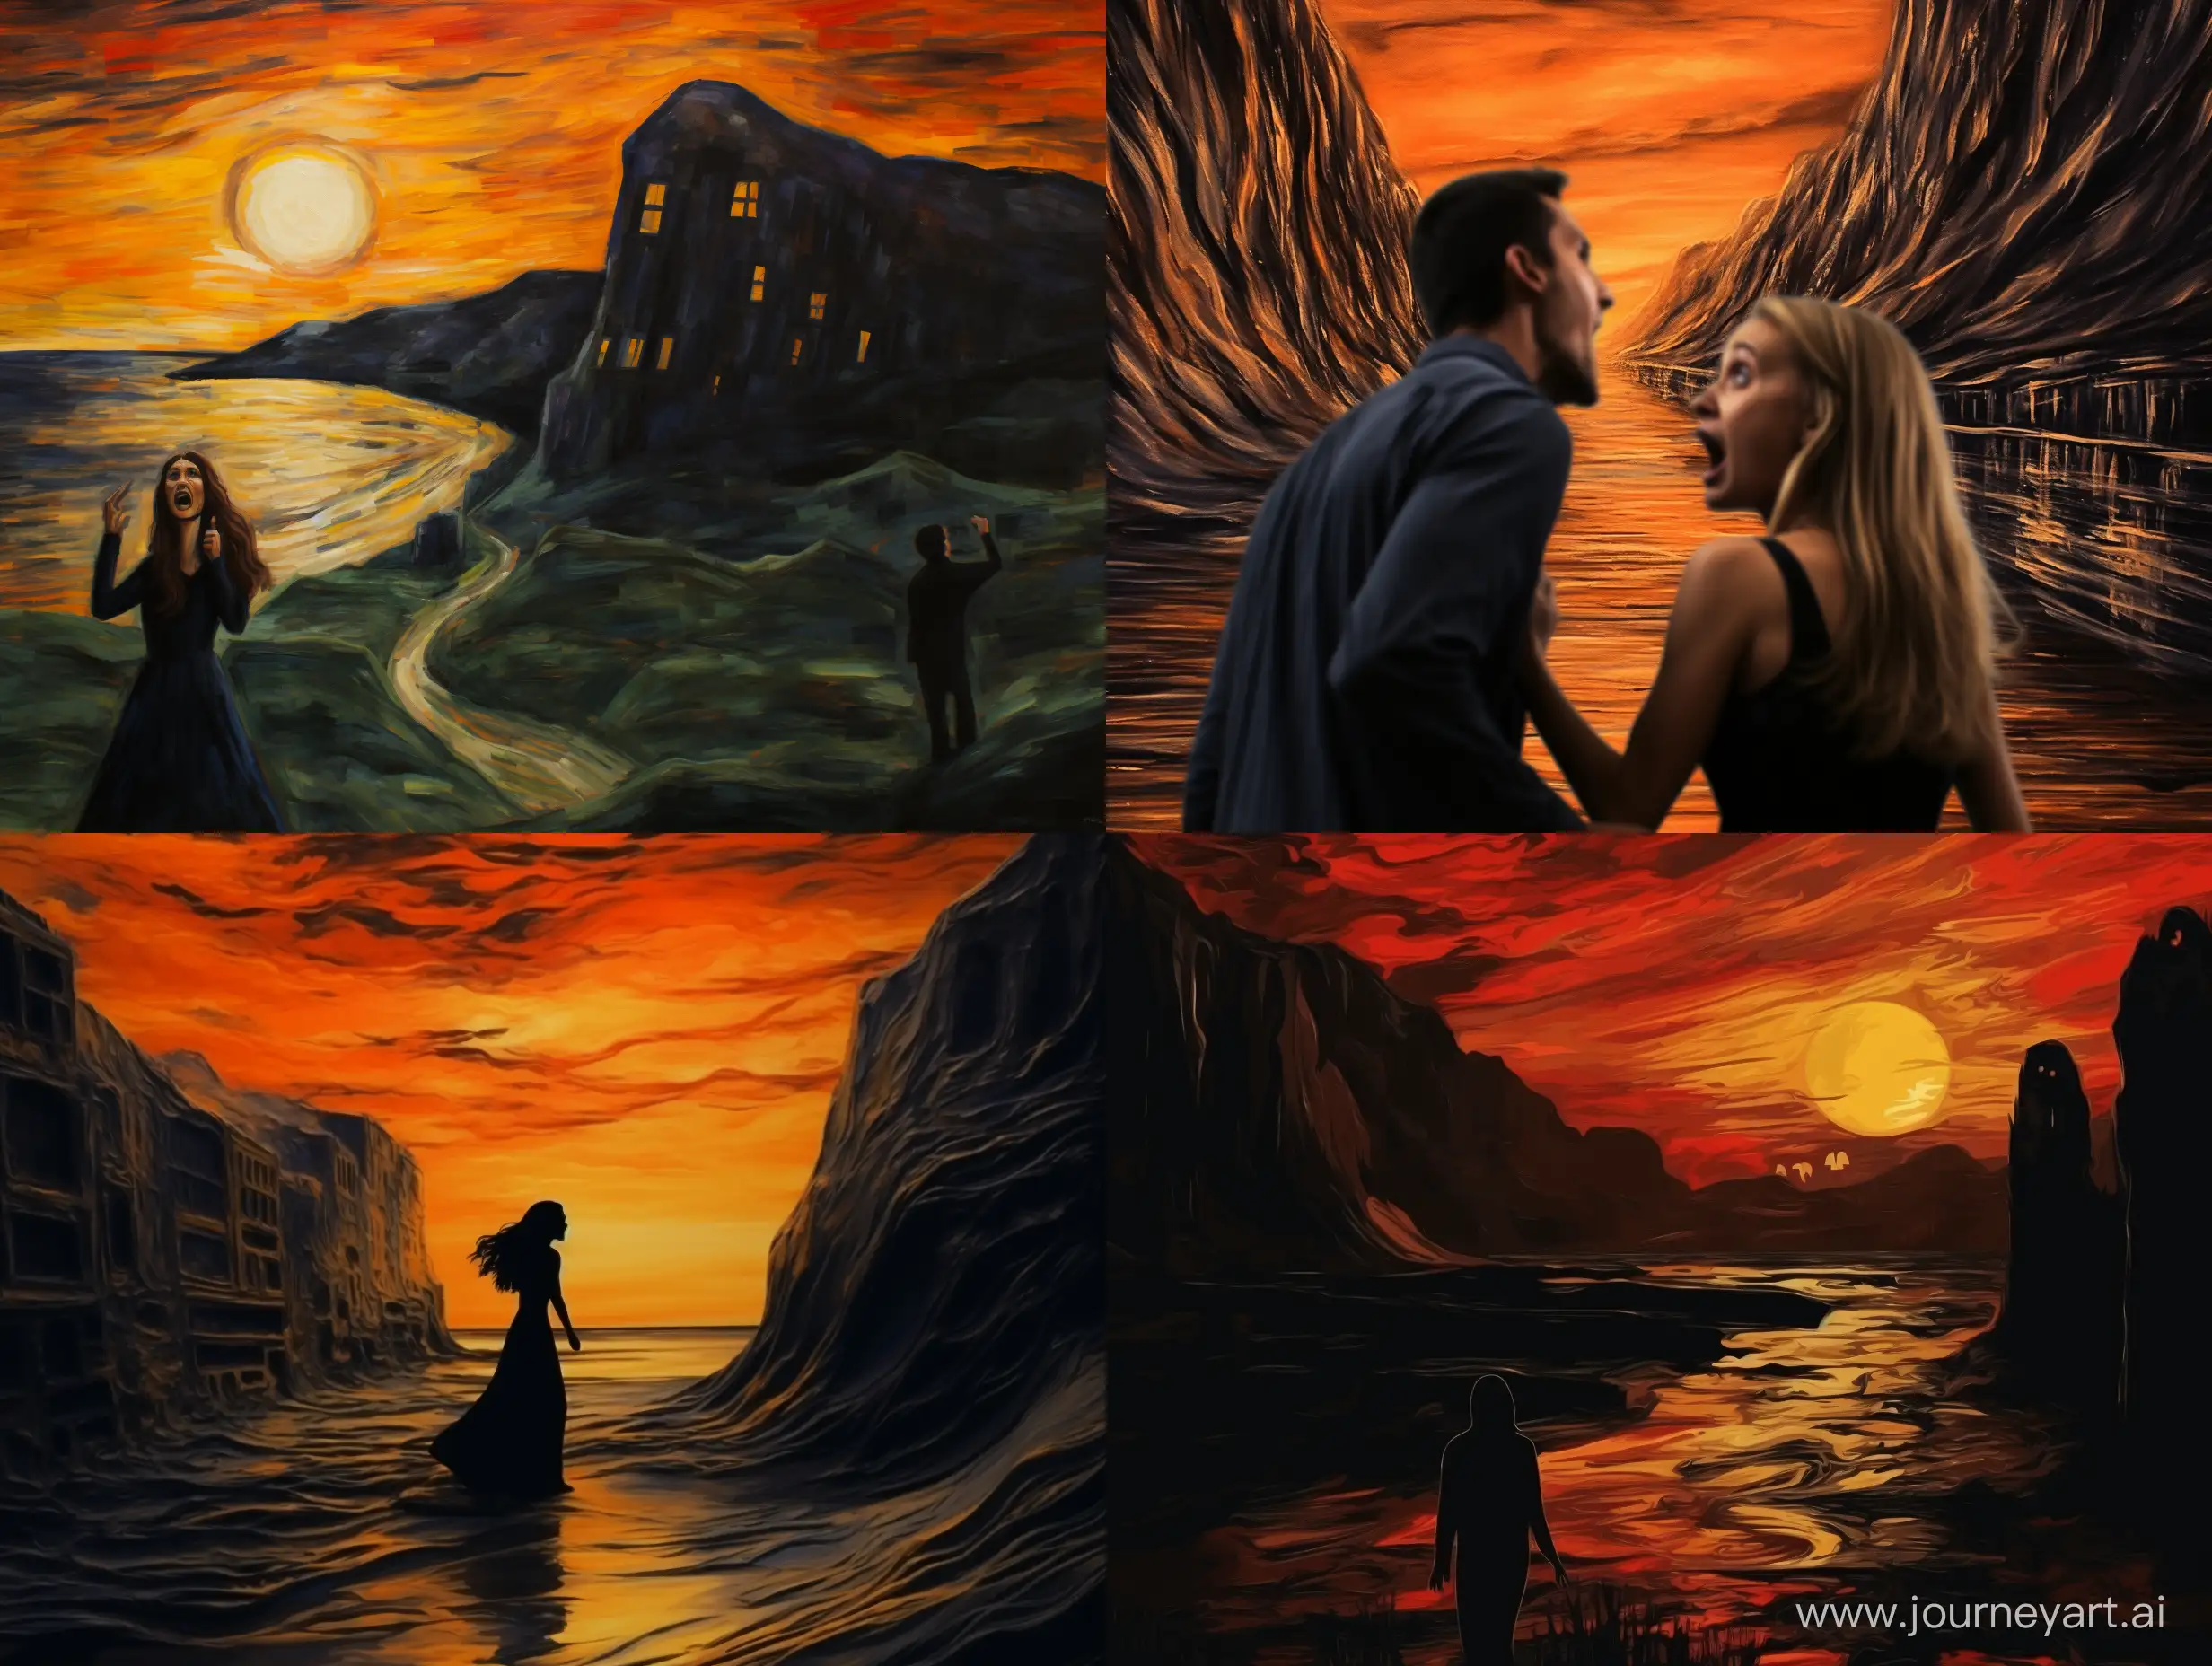 Intimate-Couple-Amidst-Cinematic-Landscape-Inspired-by-Munchs-The-Scream